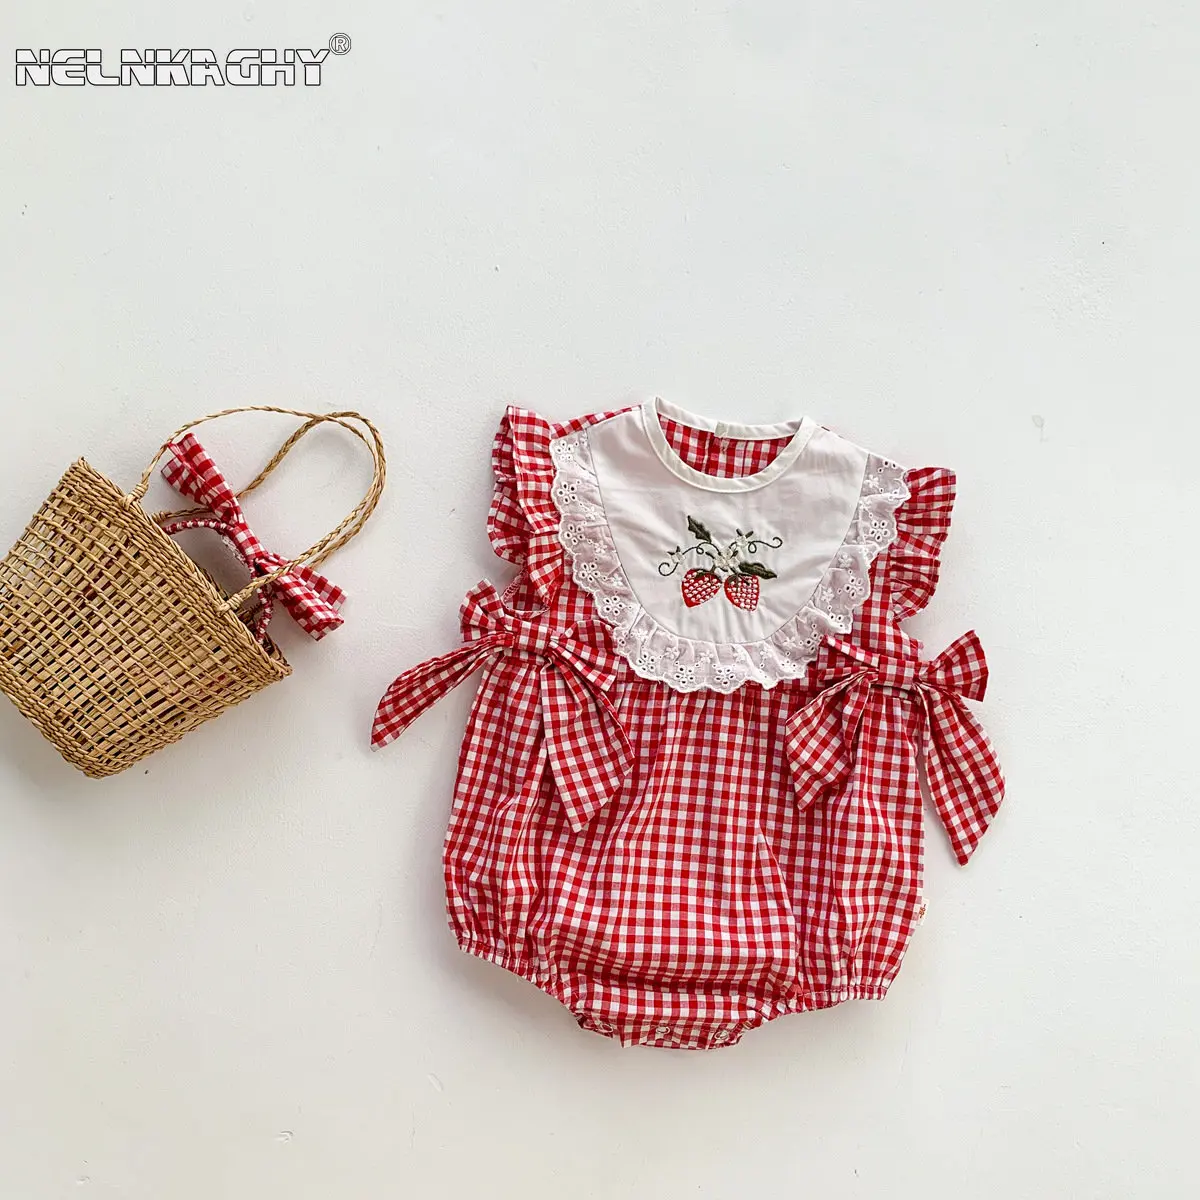 Infant Kids Girls Summer Fly Sleeve Bow Plaid Embroidery Flower Outfits Newborn Baby Clothing Jumpsuits Bodysuits Gift Headbands